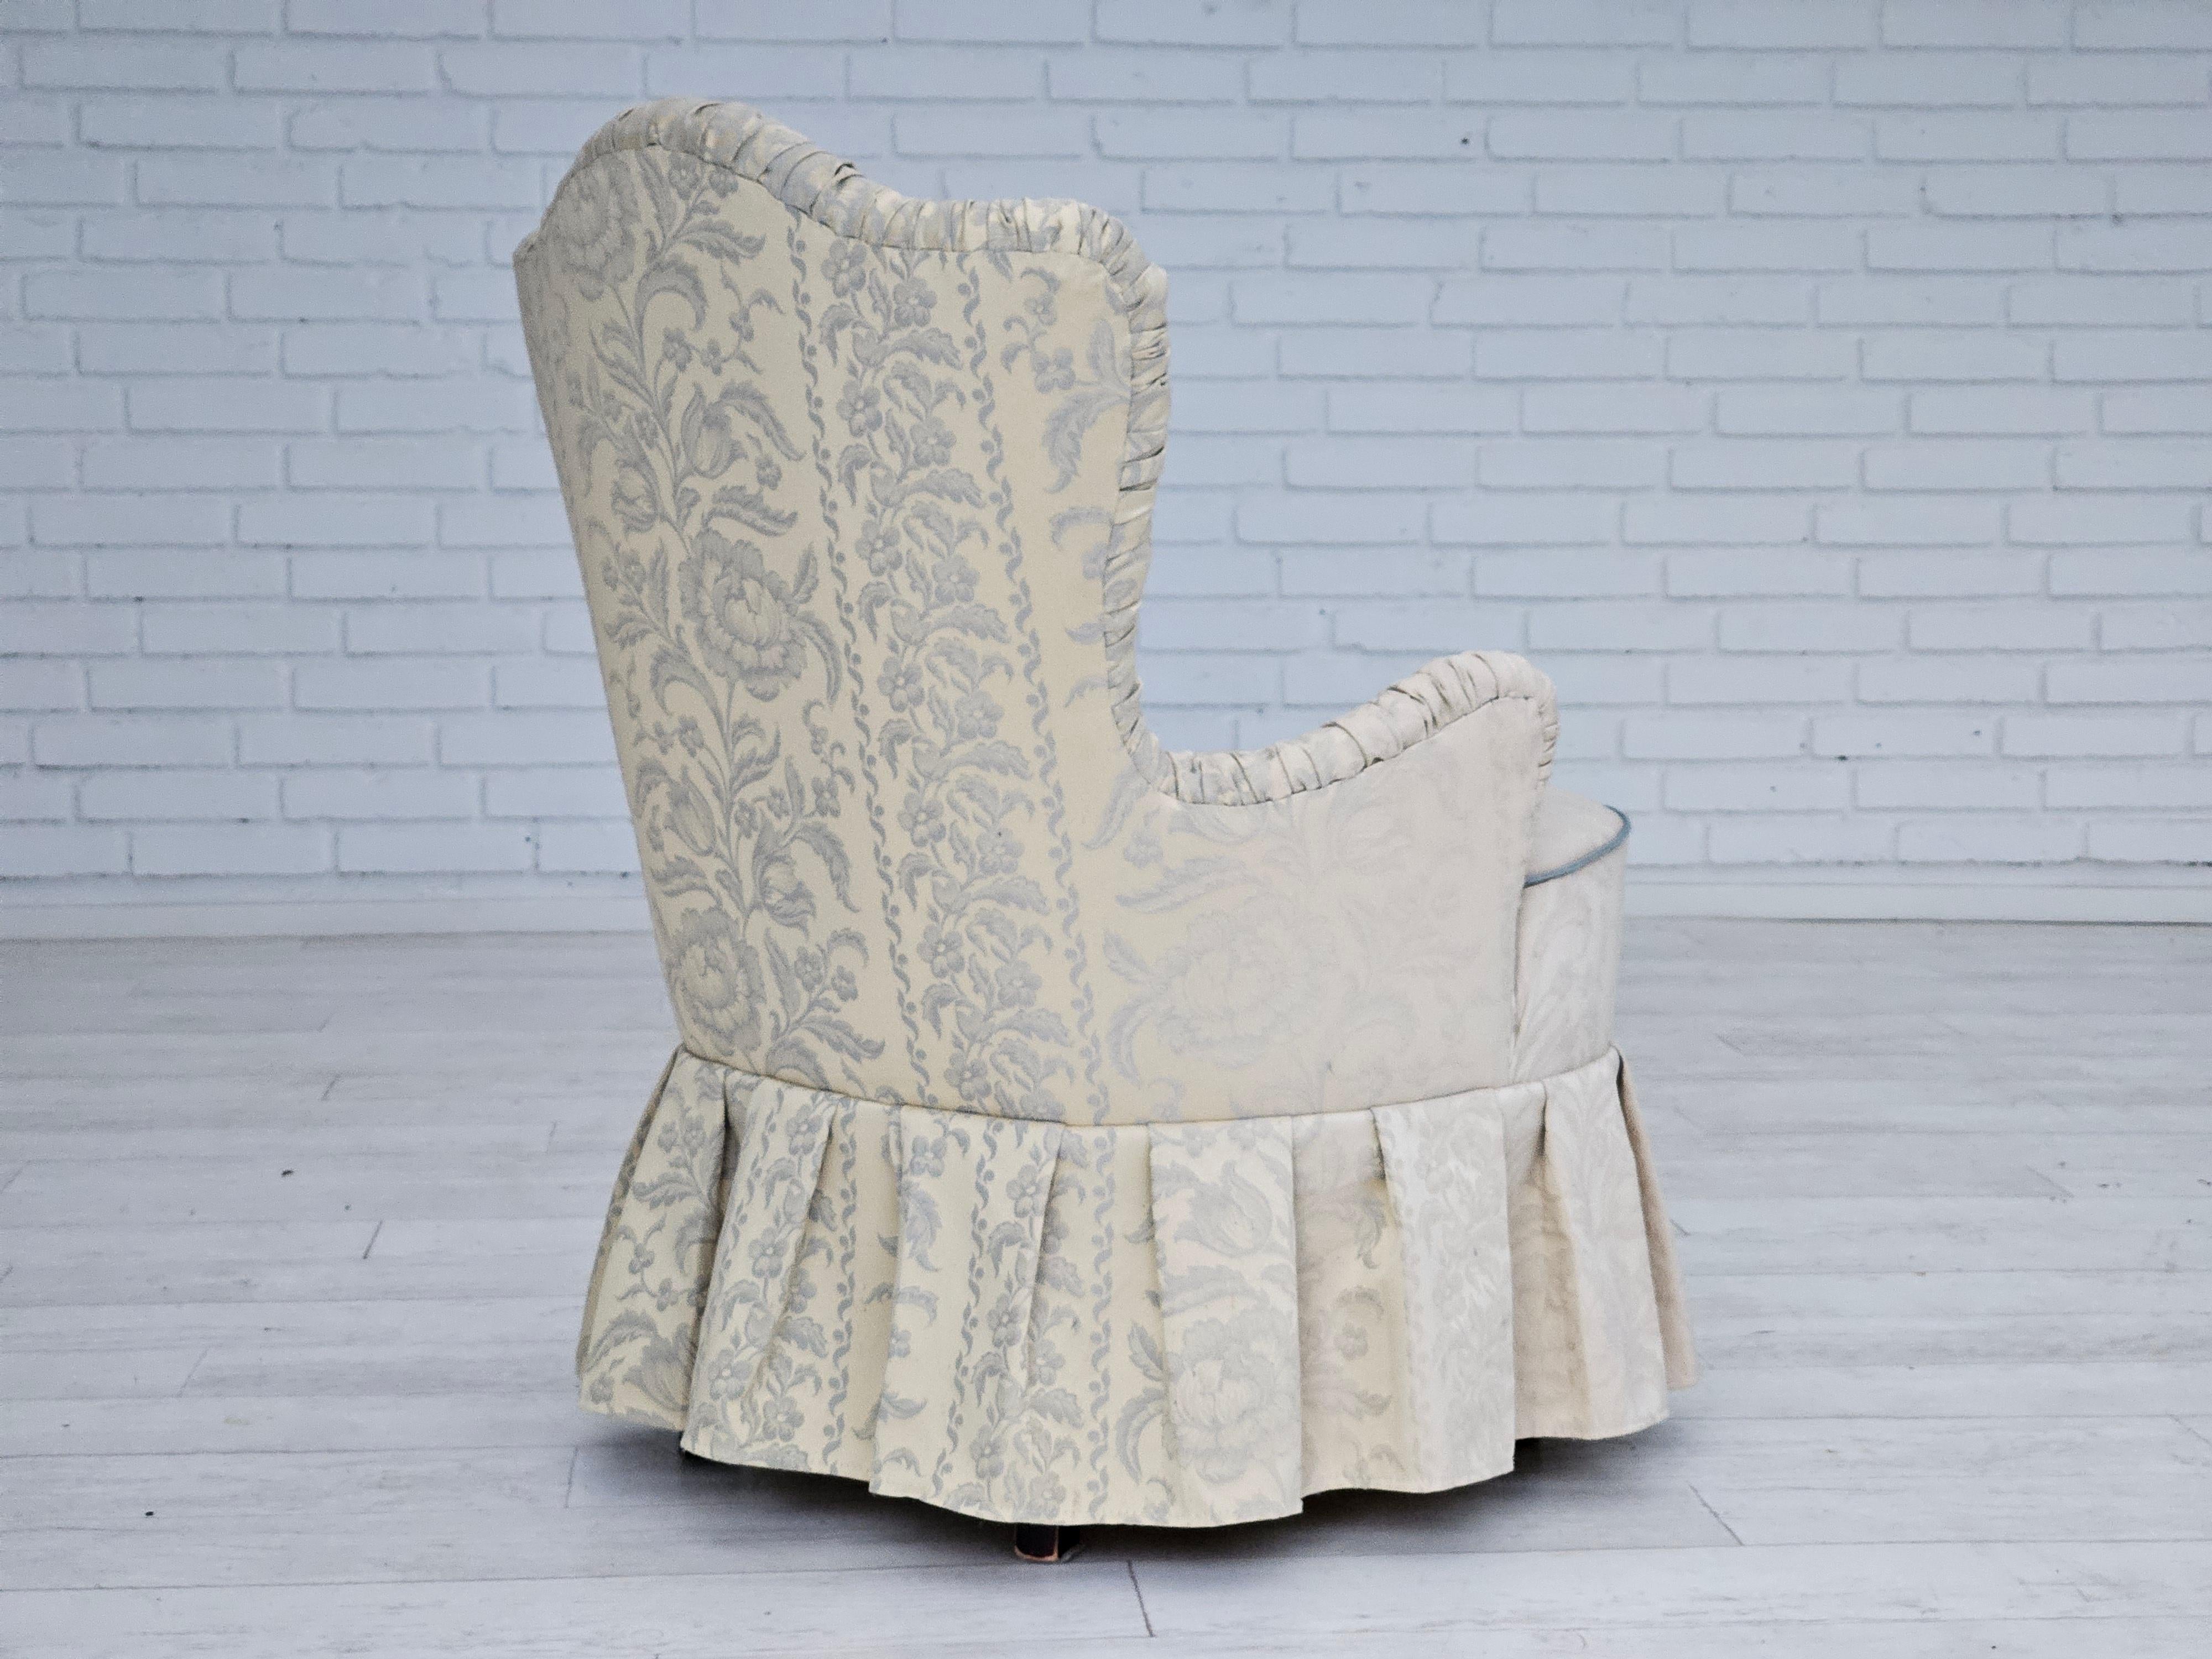 1950s, fauteuil Whiting, reupholstered, creamy/white floral fabric. en vente 2